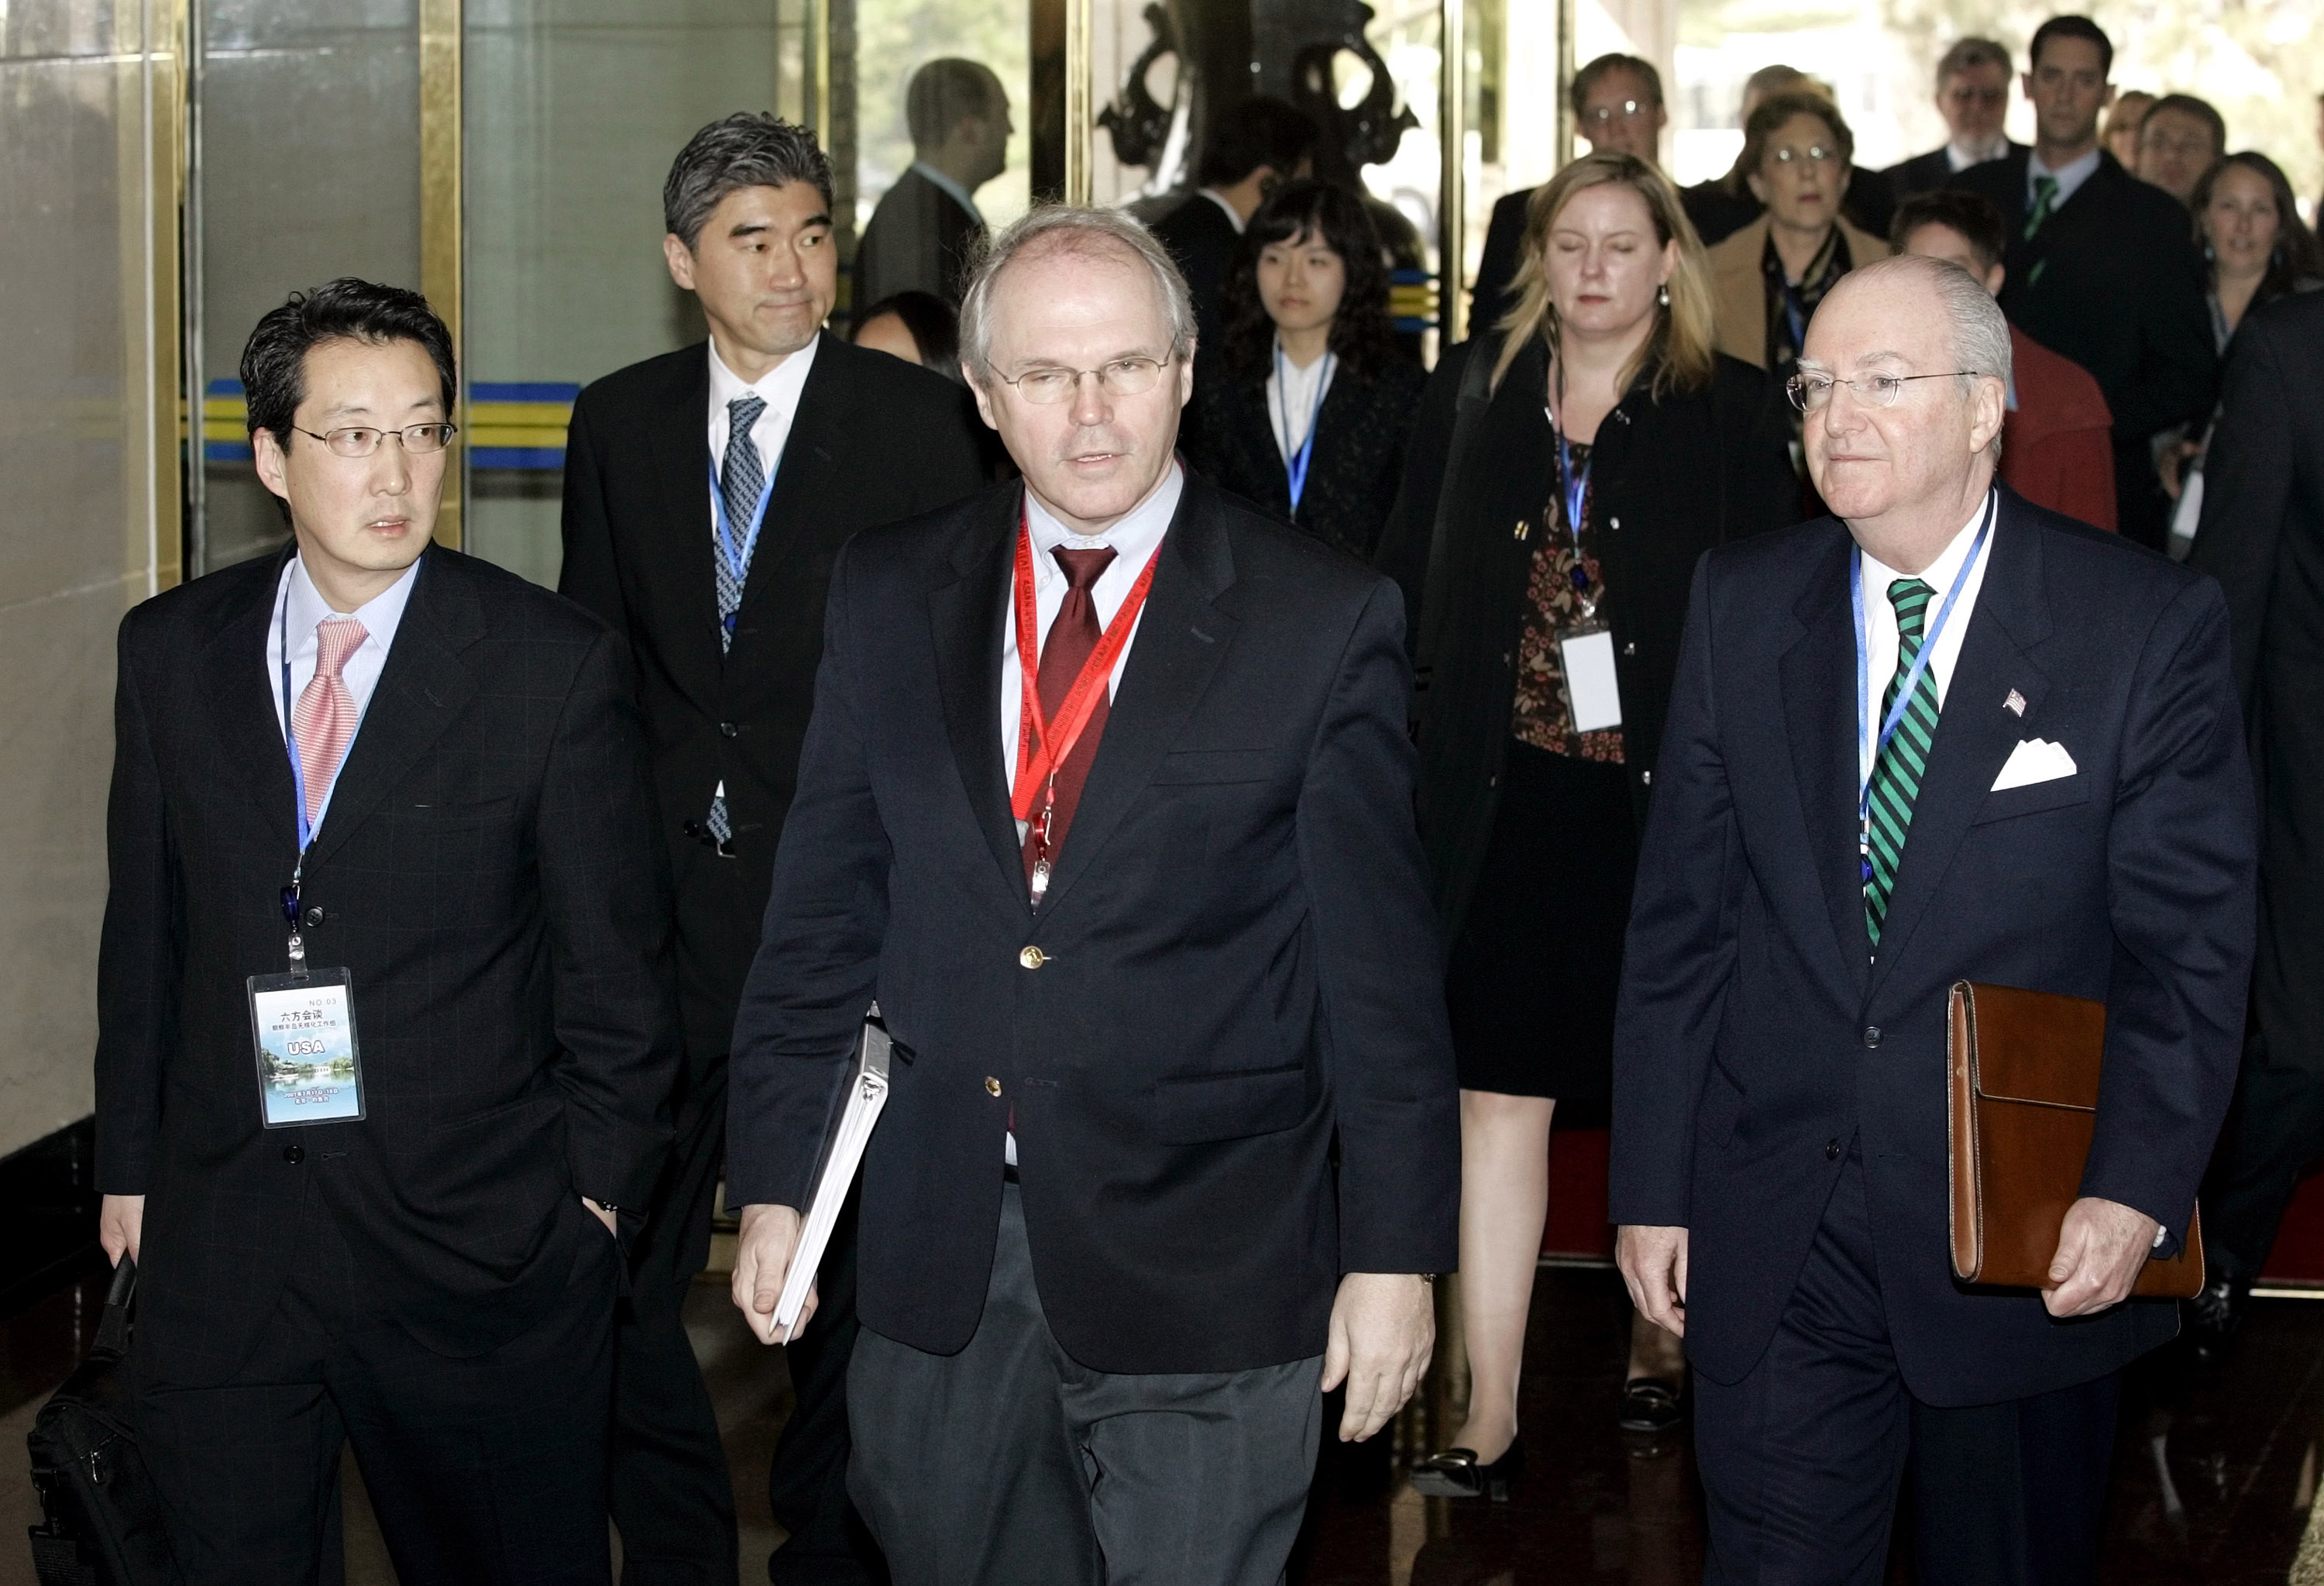 I n this March 17 2007 file photo, Victor Cha (L), then the U.S. National Security Council's director for Asian Affairs, arrives with U.S. Assistant Secretary of State Christopher Hill (C), and Ambassador to China Clark Randt (R), at the opening of denuclearization negotiations with North Korea in Beijing (Greg Baker—Pool/Getty Images)